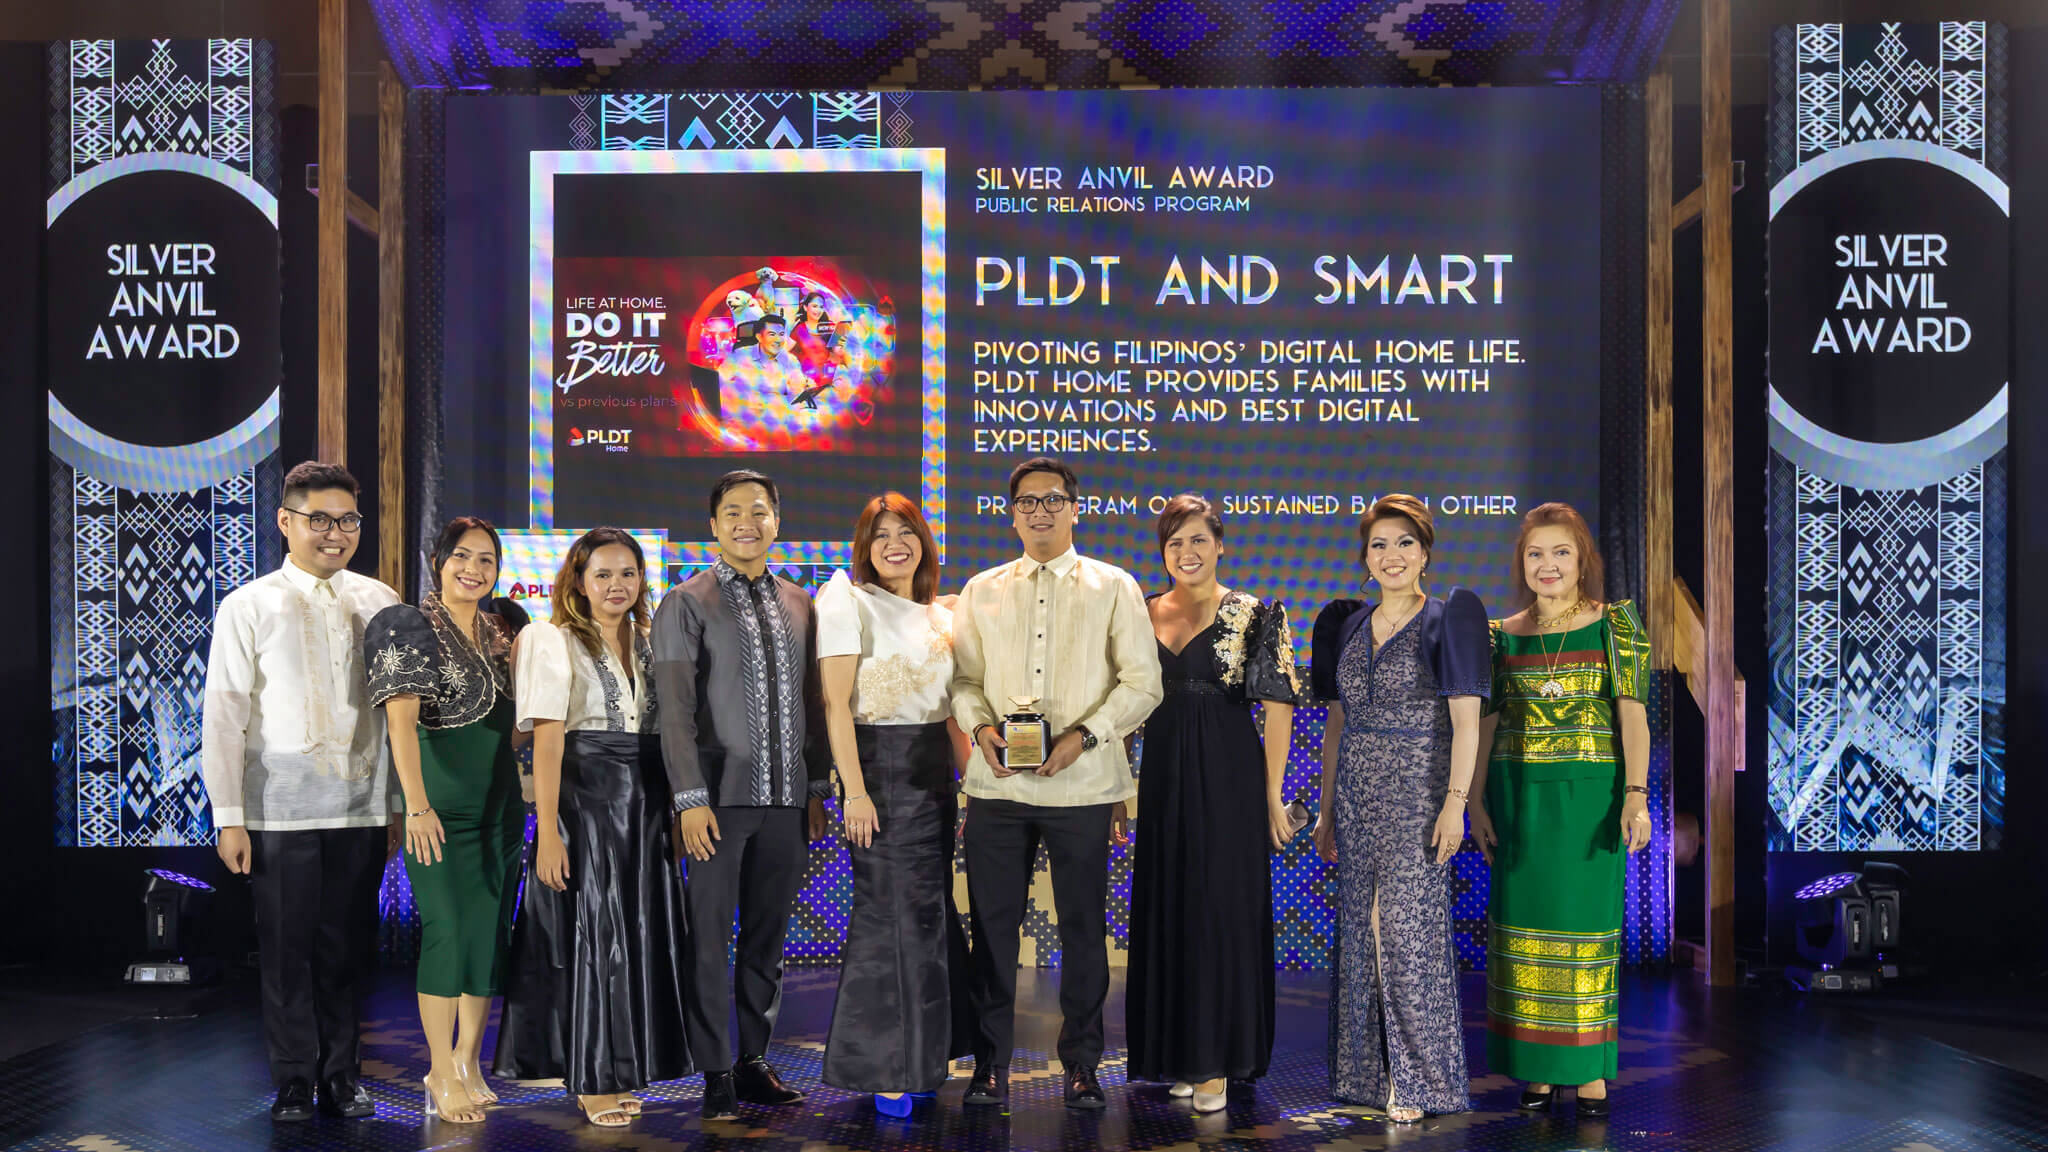 PLDT Home also bagged the Silver Anvil Award for its “Do It Better” campaign. In photo are: PLDT Home Product Manager for Entertainment Kristine Rementilla, Digital Marketing Specialist Christine Jane Sab, Brand Equity Manager Eason de Guzman Jr., AVP and Head of Digital Services Janice Lagaso, Senior Product Manager and Head of Fixed Wired Broadband Irwin de Guzman, VP and Head of Digital Services Evert Chris Miranda, and FVP and Group Head of Corporate Communications at PLDT and Smart Cathy Yang.